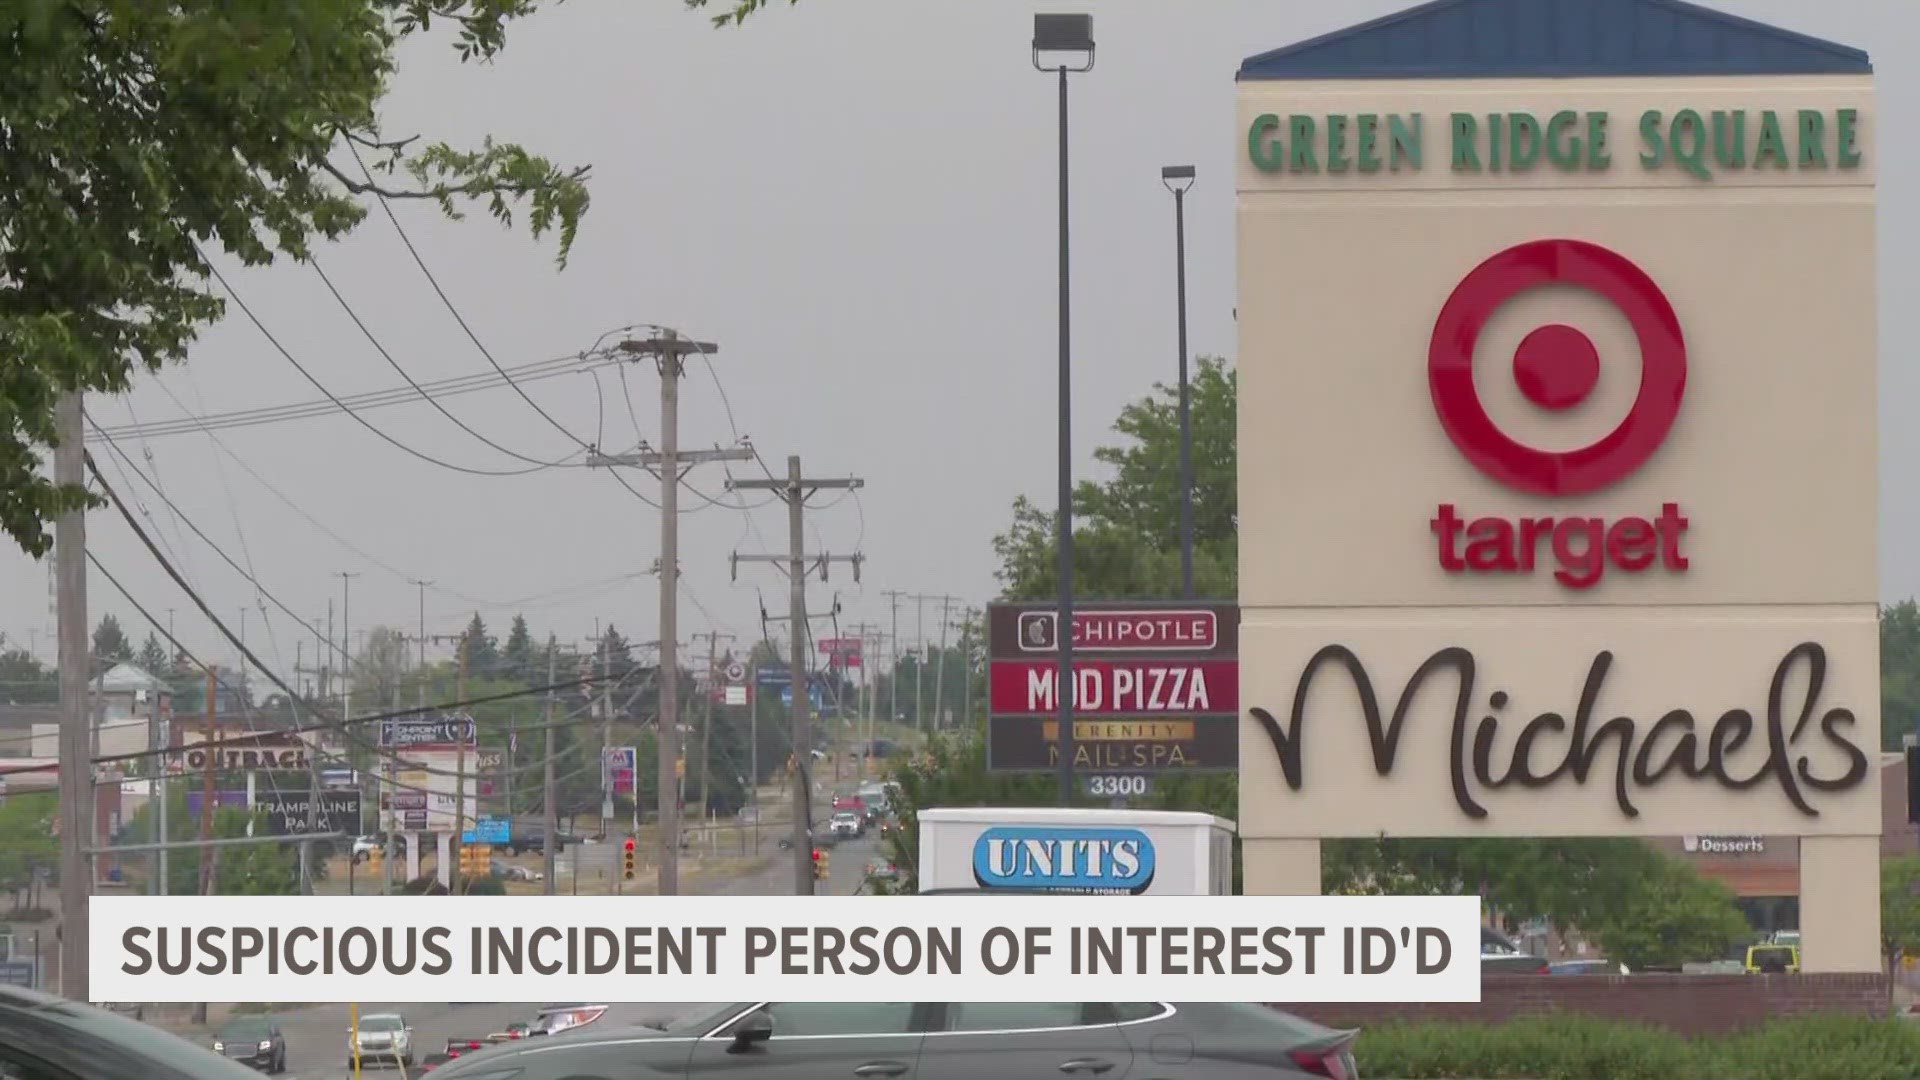 Walker Police identified the man as a person of interest after a 'suspicious' encounter near the dressing room area of the Target on Alpine Avenue in Walker.